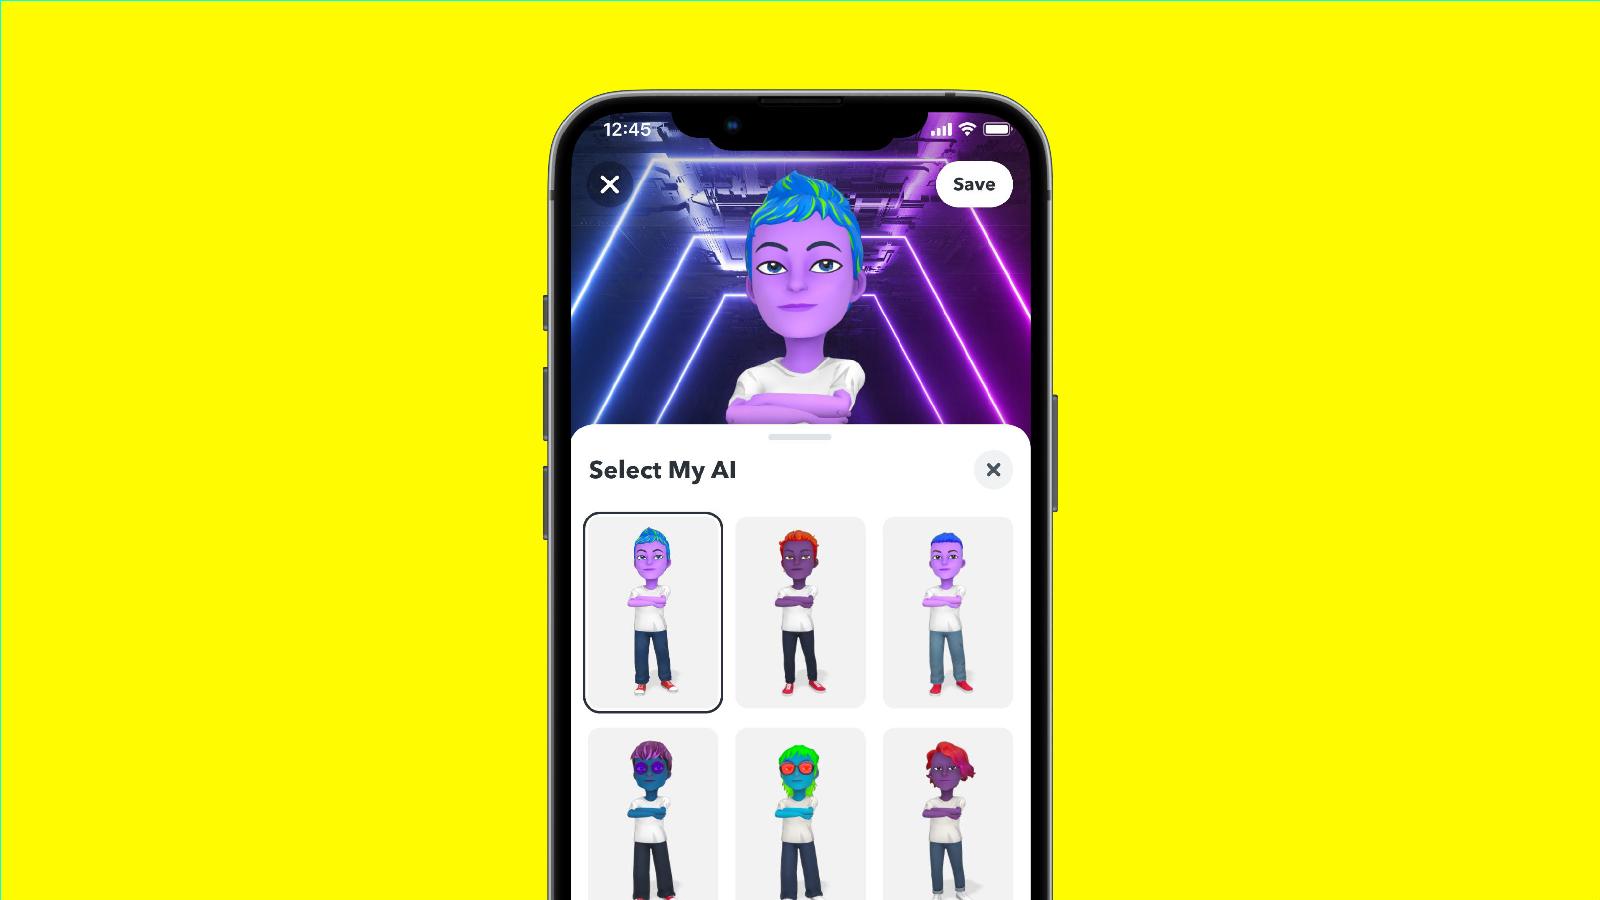 Snapchat sees spike in 1-star reviews as users pan the ‘My AI’ feature, calling for its removal